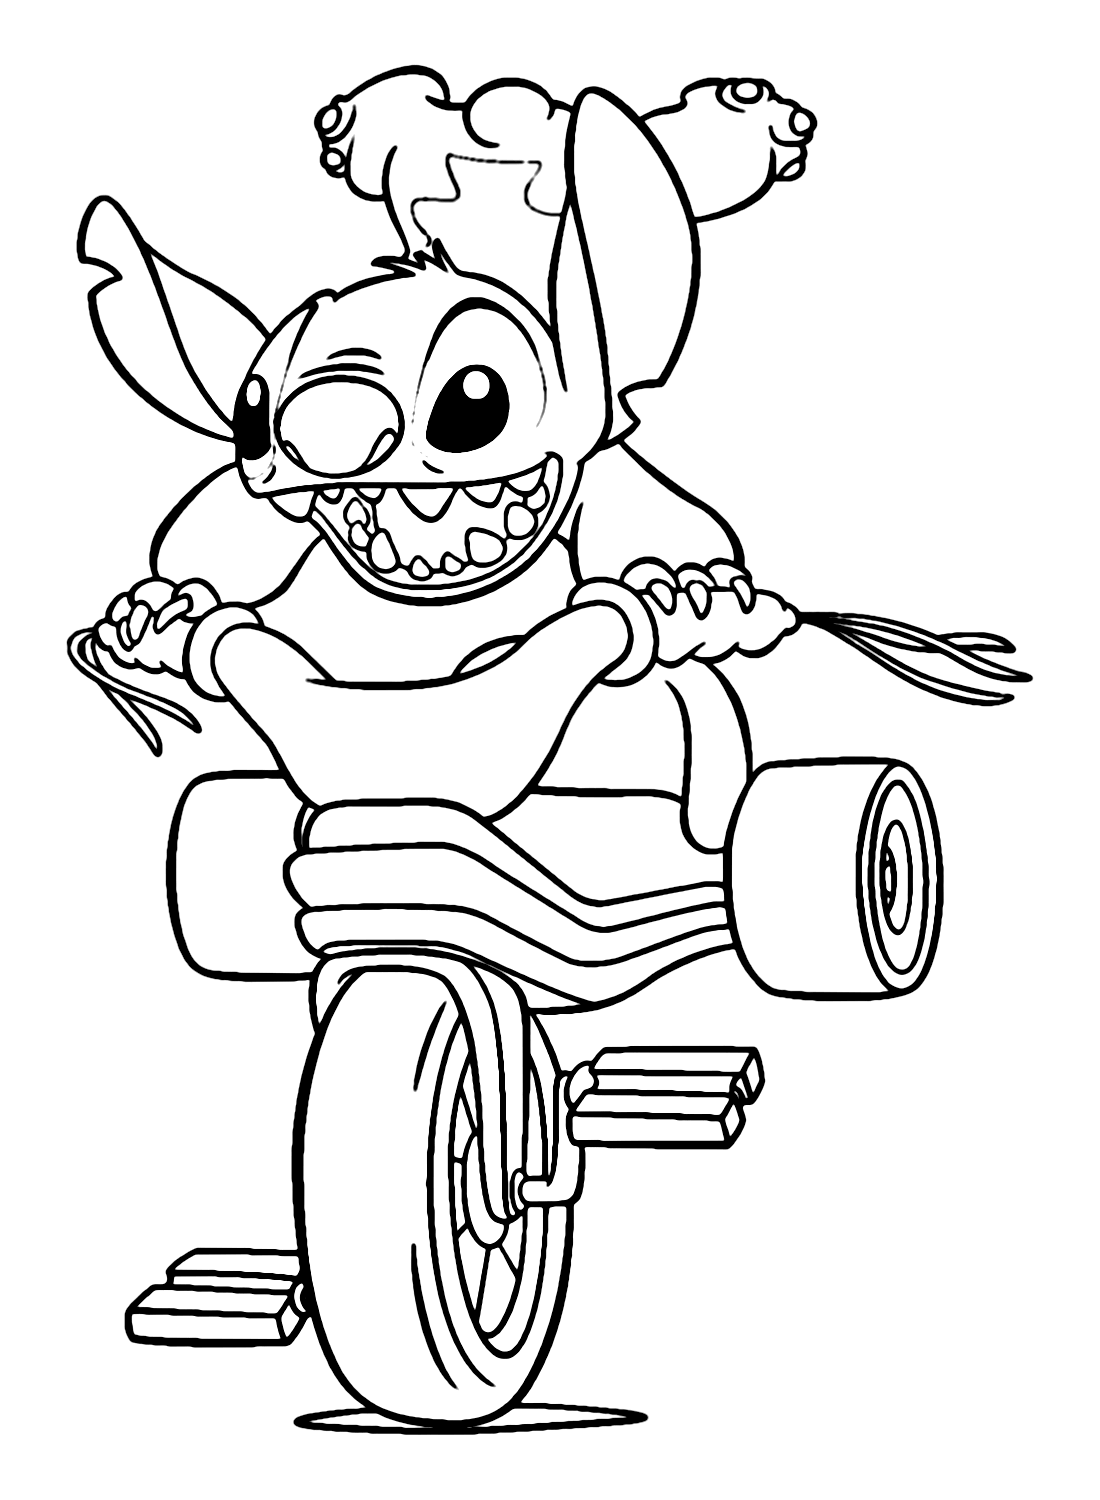 Printable Cute Stitch Coloring Pages Coloring Page